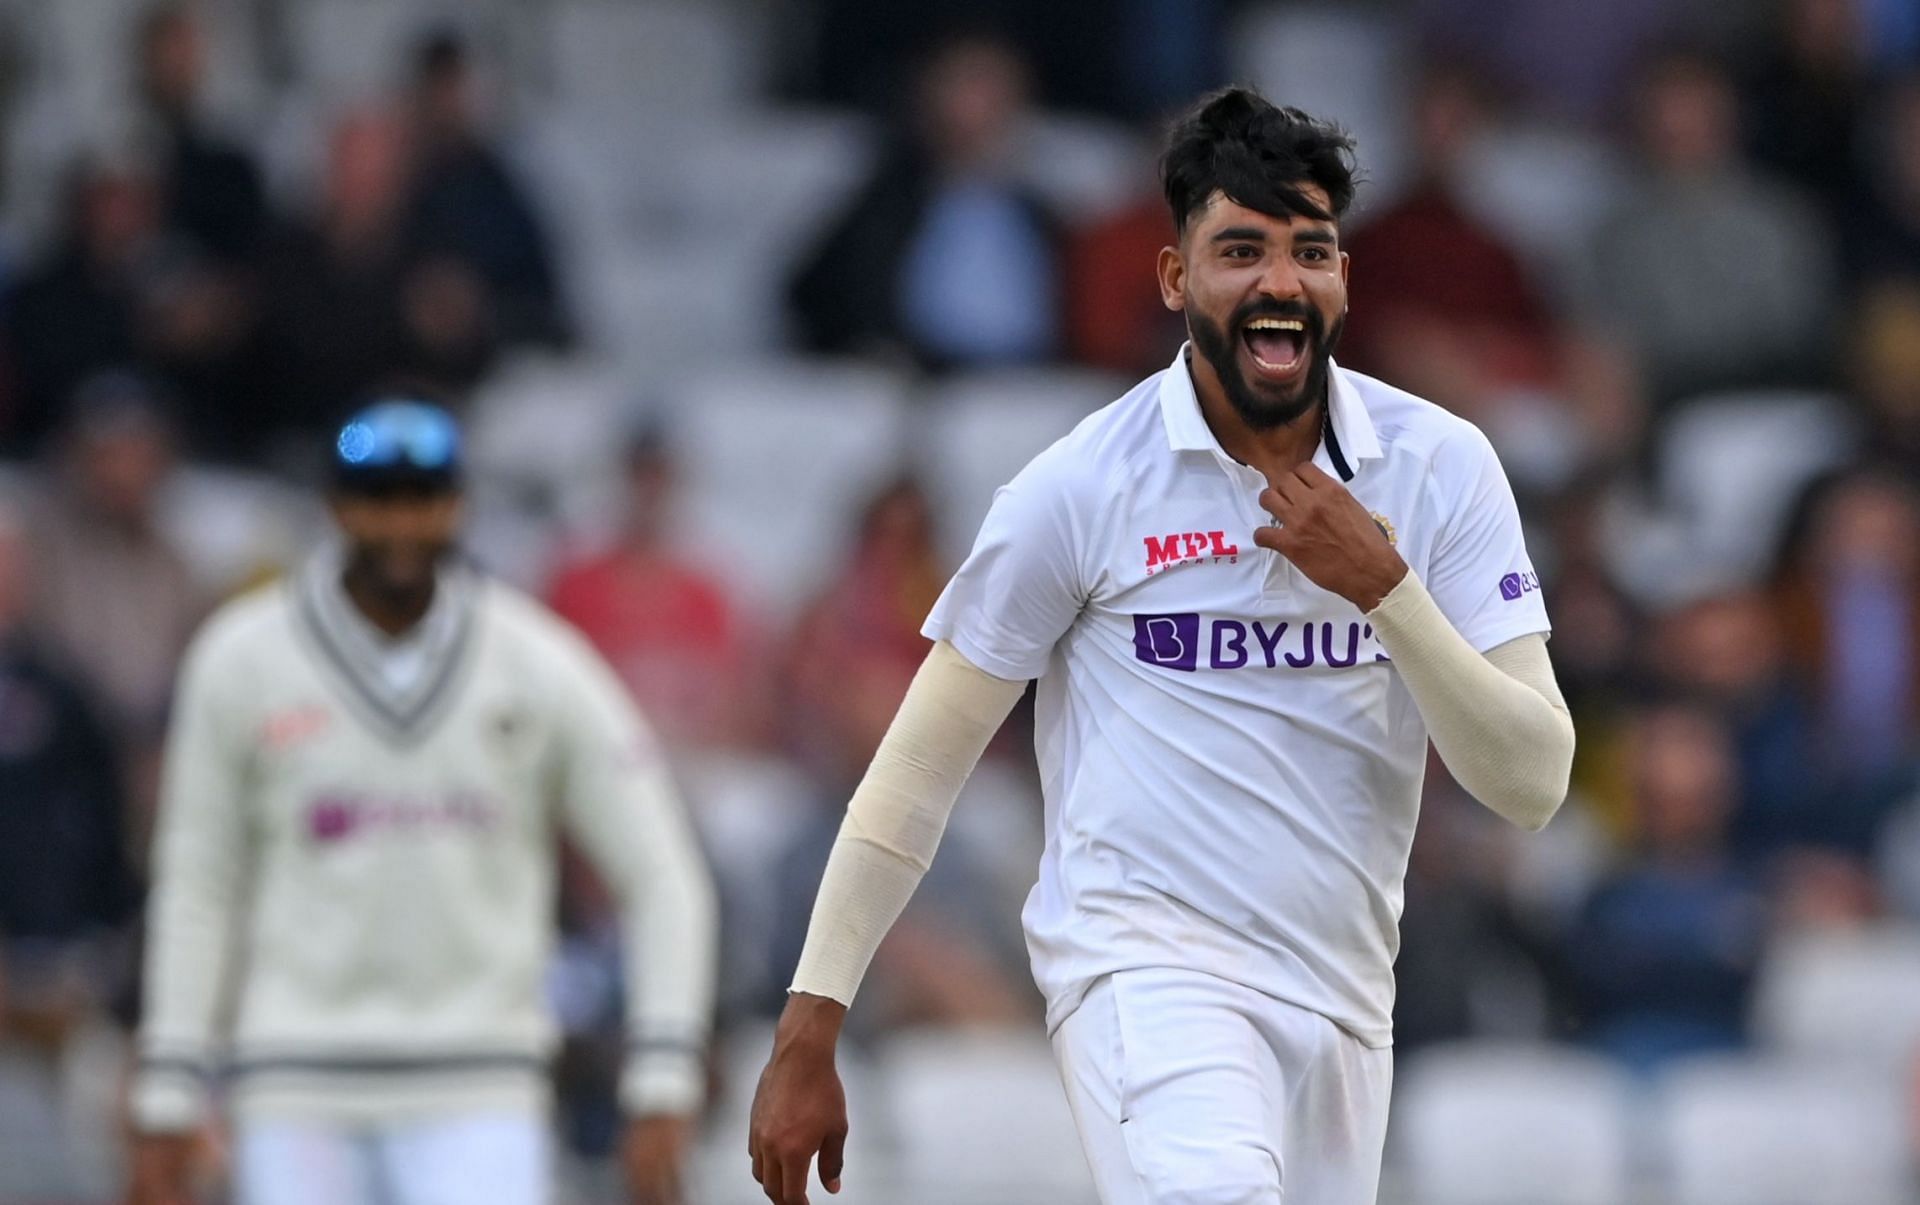 Mohammed Siraj rocked the opposition top order in the Mumbai Test against New Zealand